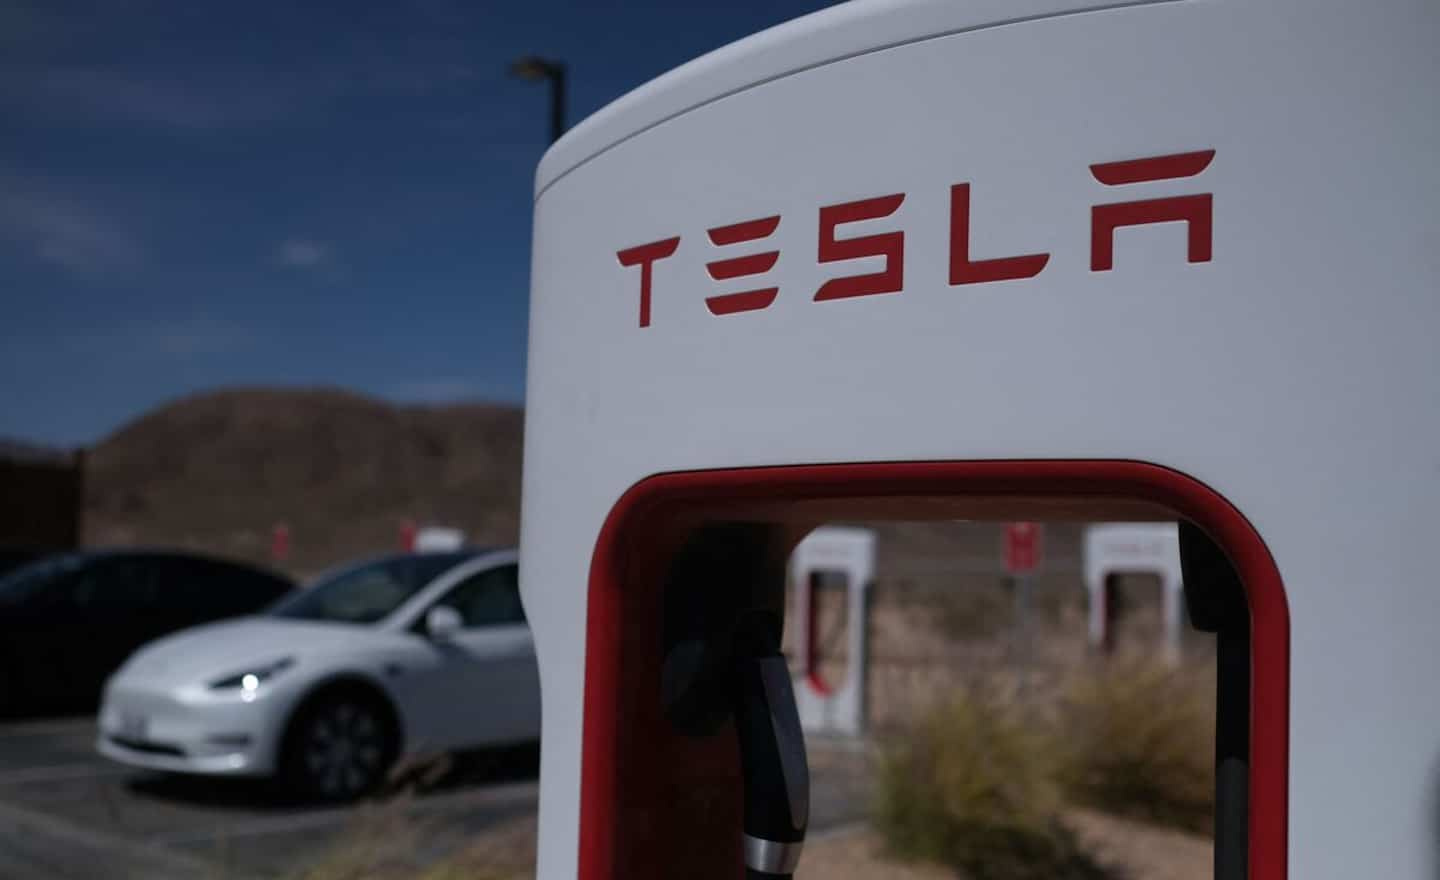 Cameras and privacy, Tesla implicated in Germany over data protection